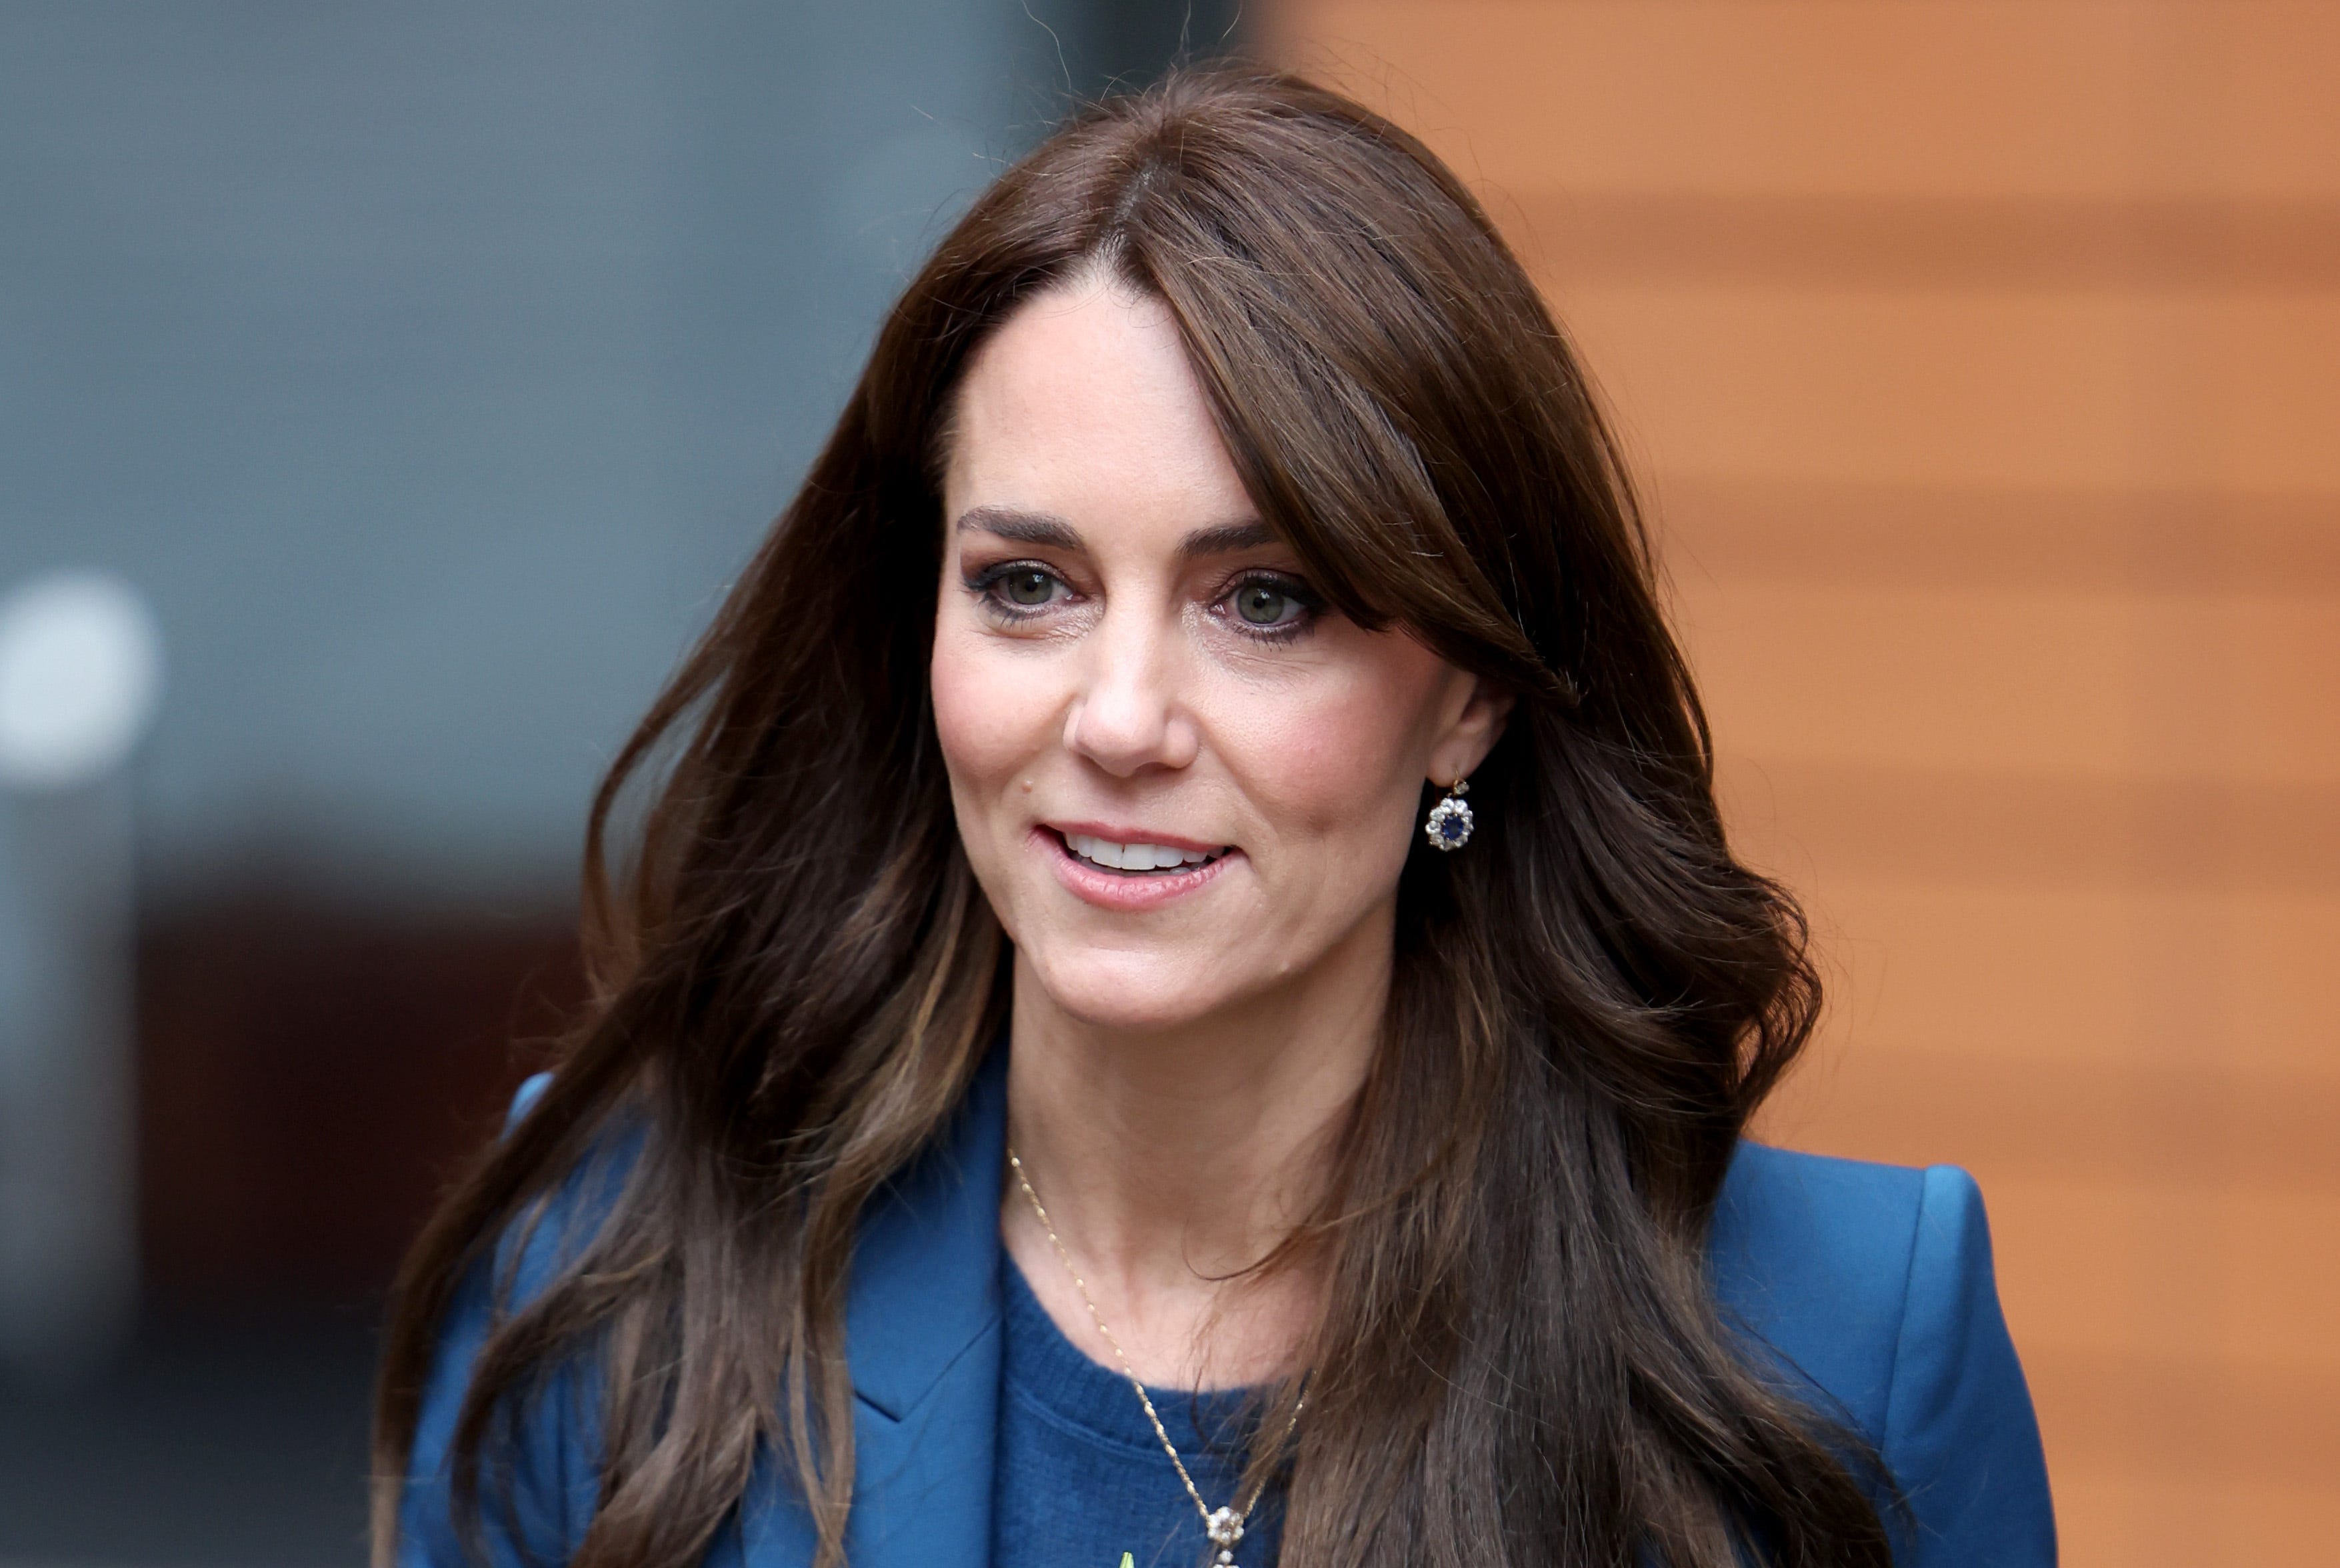 New Photograph of Kate Middleton and Her Children Recalled by Major Picture Agencies